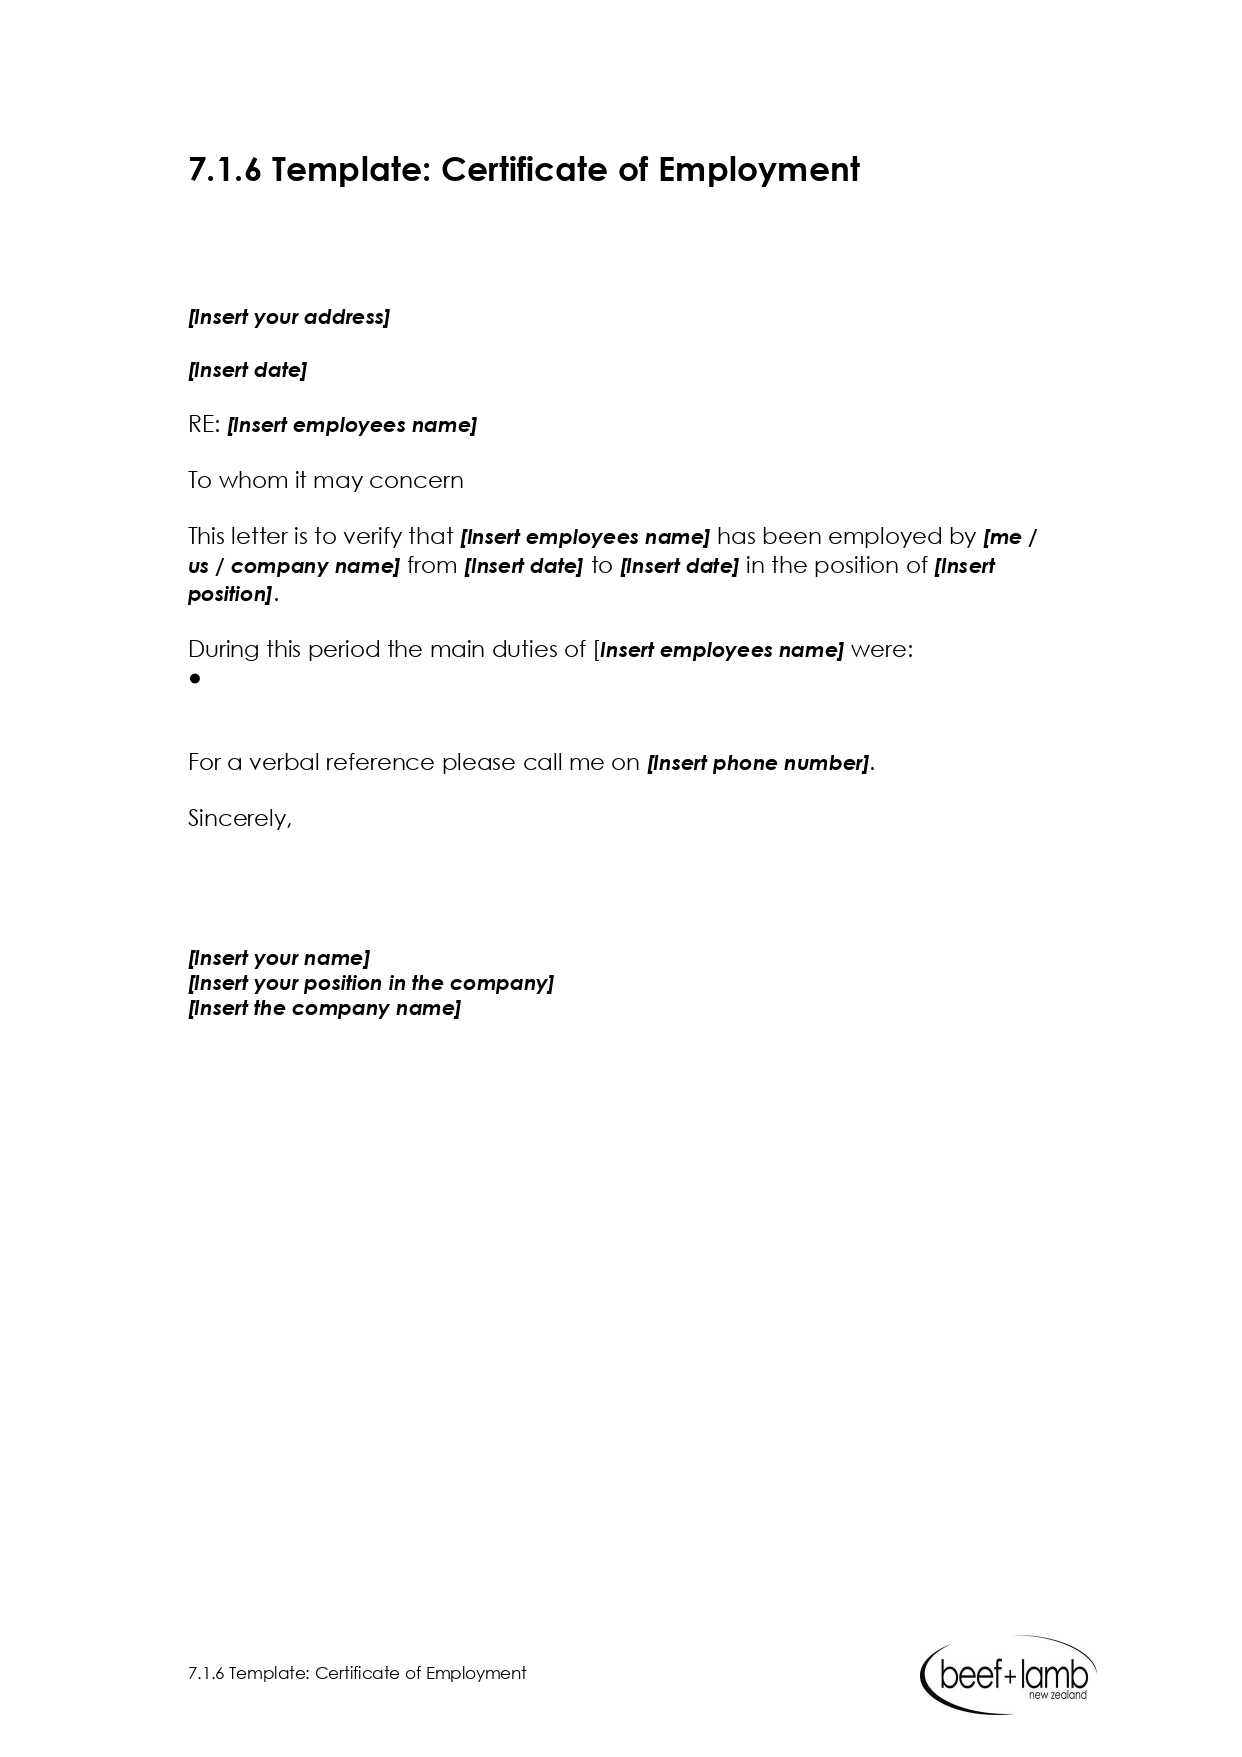 Editable Certificate Of Employment Template – Google Docs Throughout Template Of Certificate Of Employment